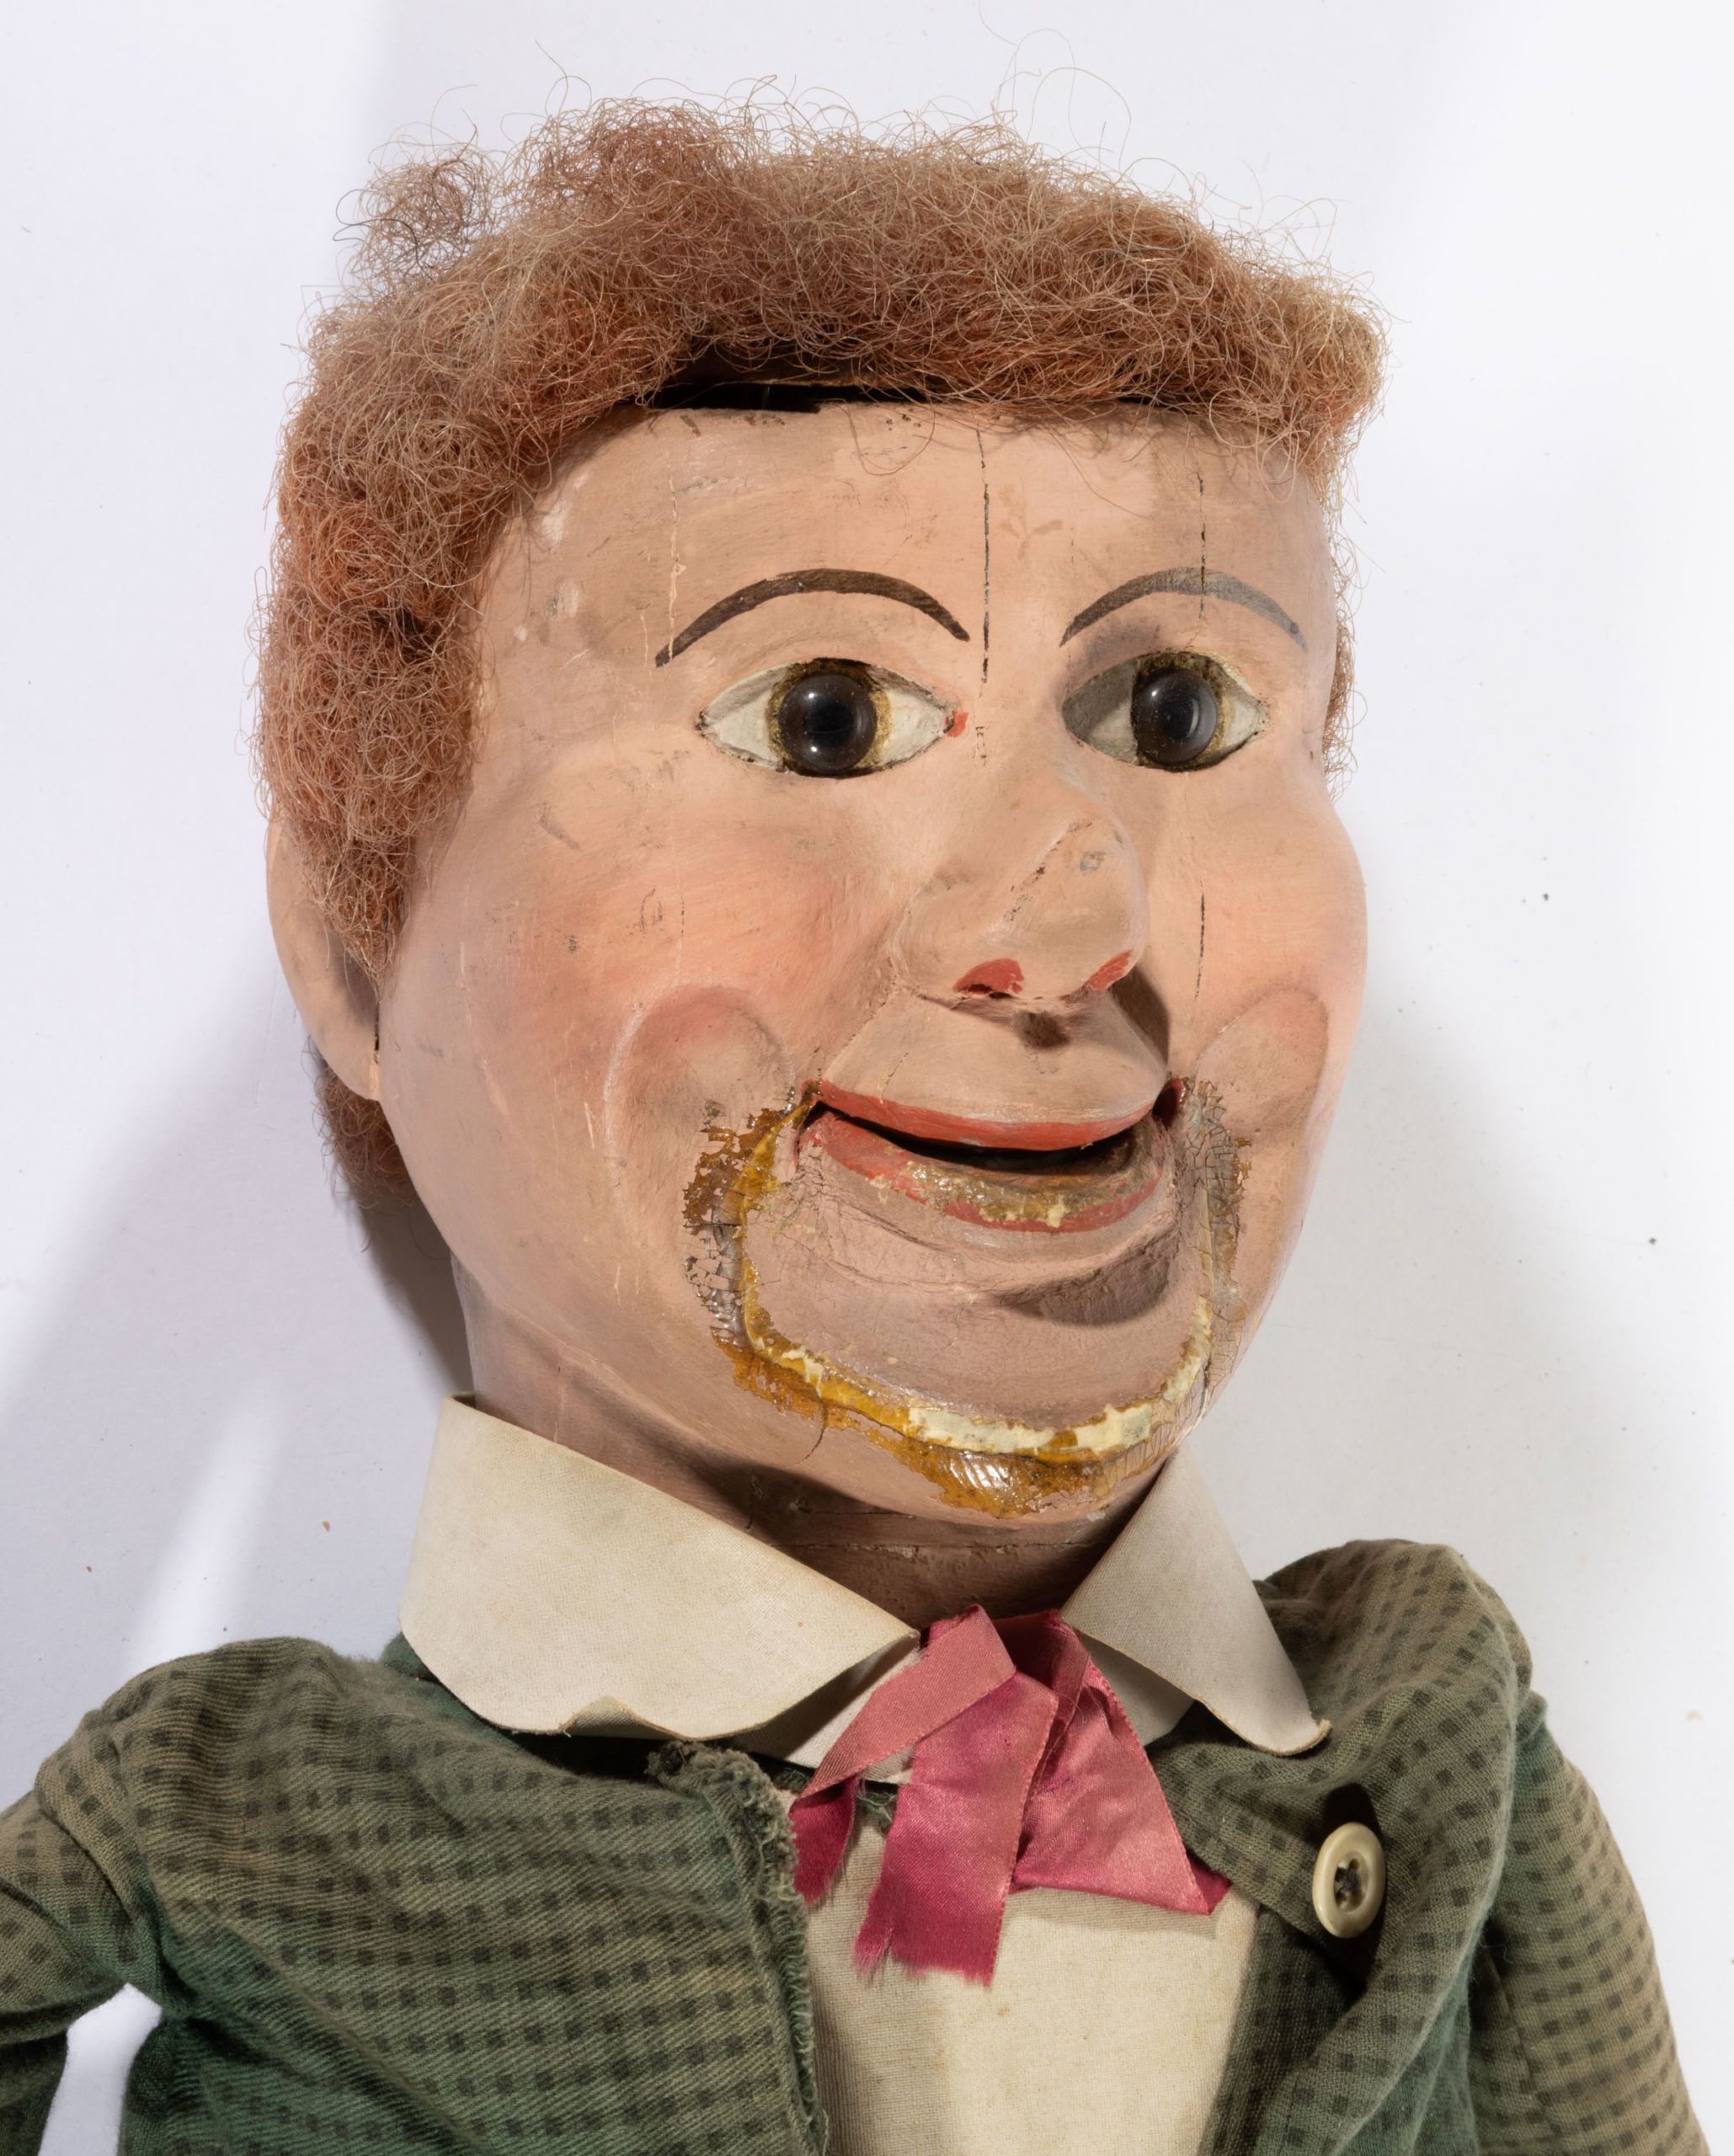 AMERICAN FOLK ART CARVED AND PAINTED VENTRILOQUIST DOLL / DUMMY,